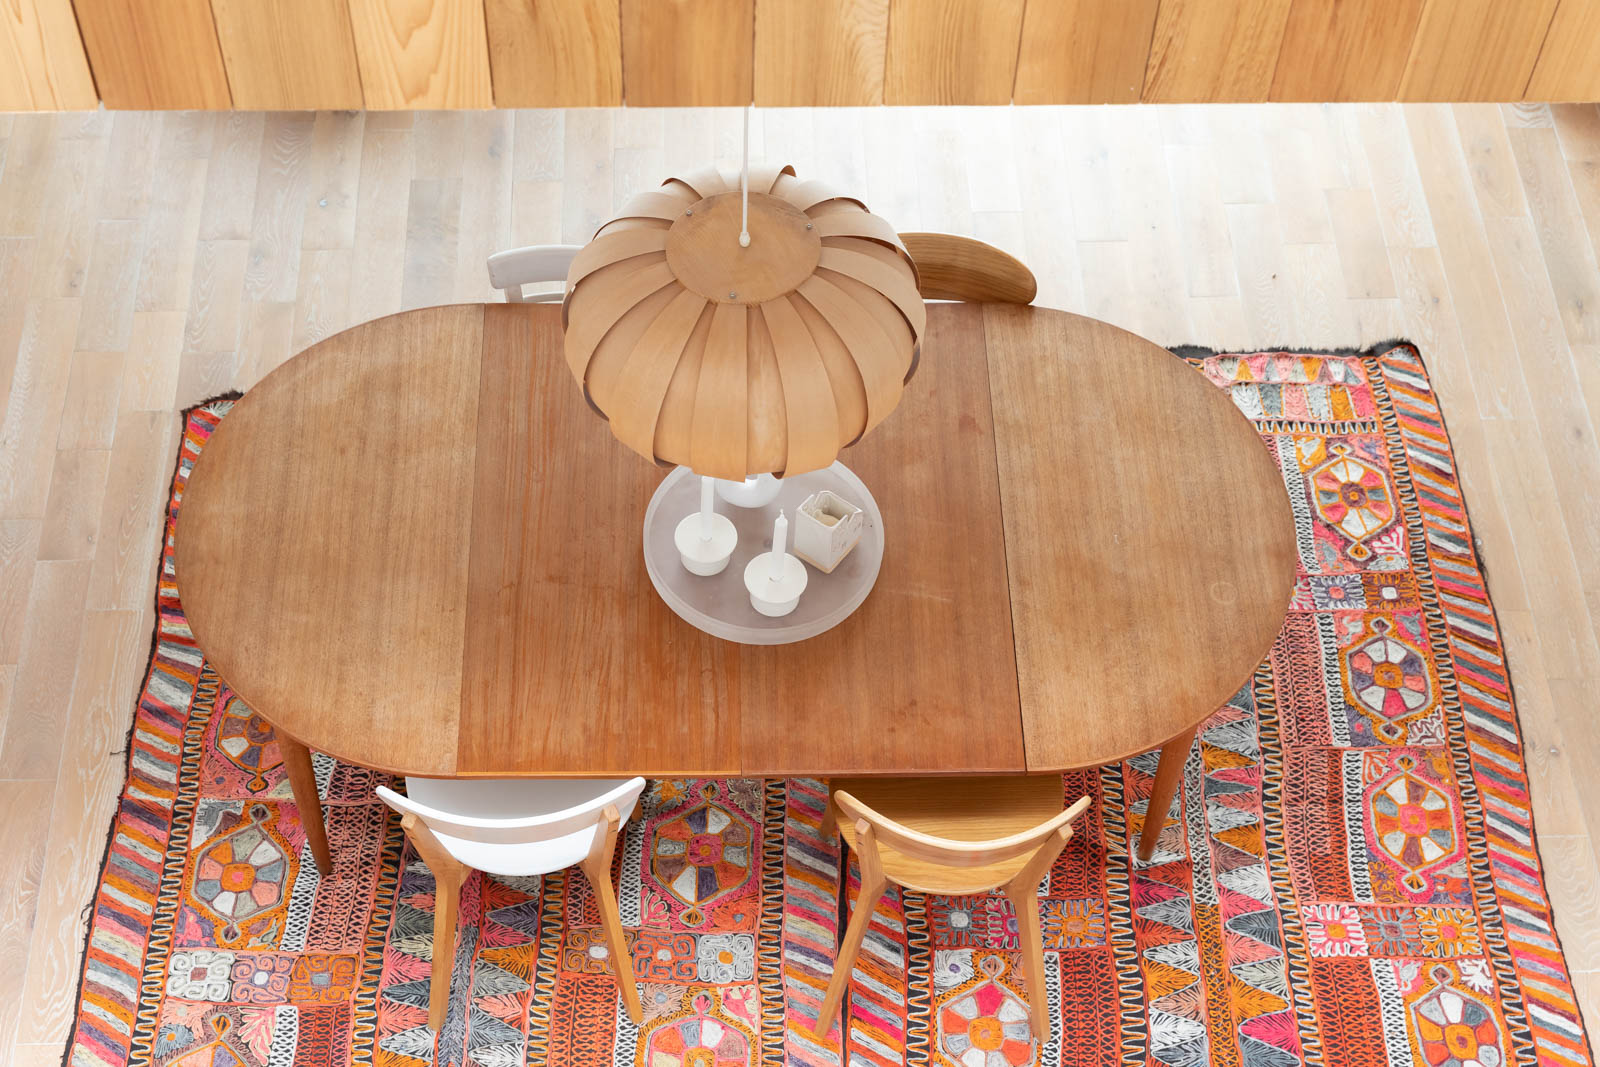 A birds-eye view of the dining room table